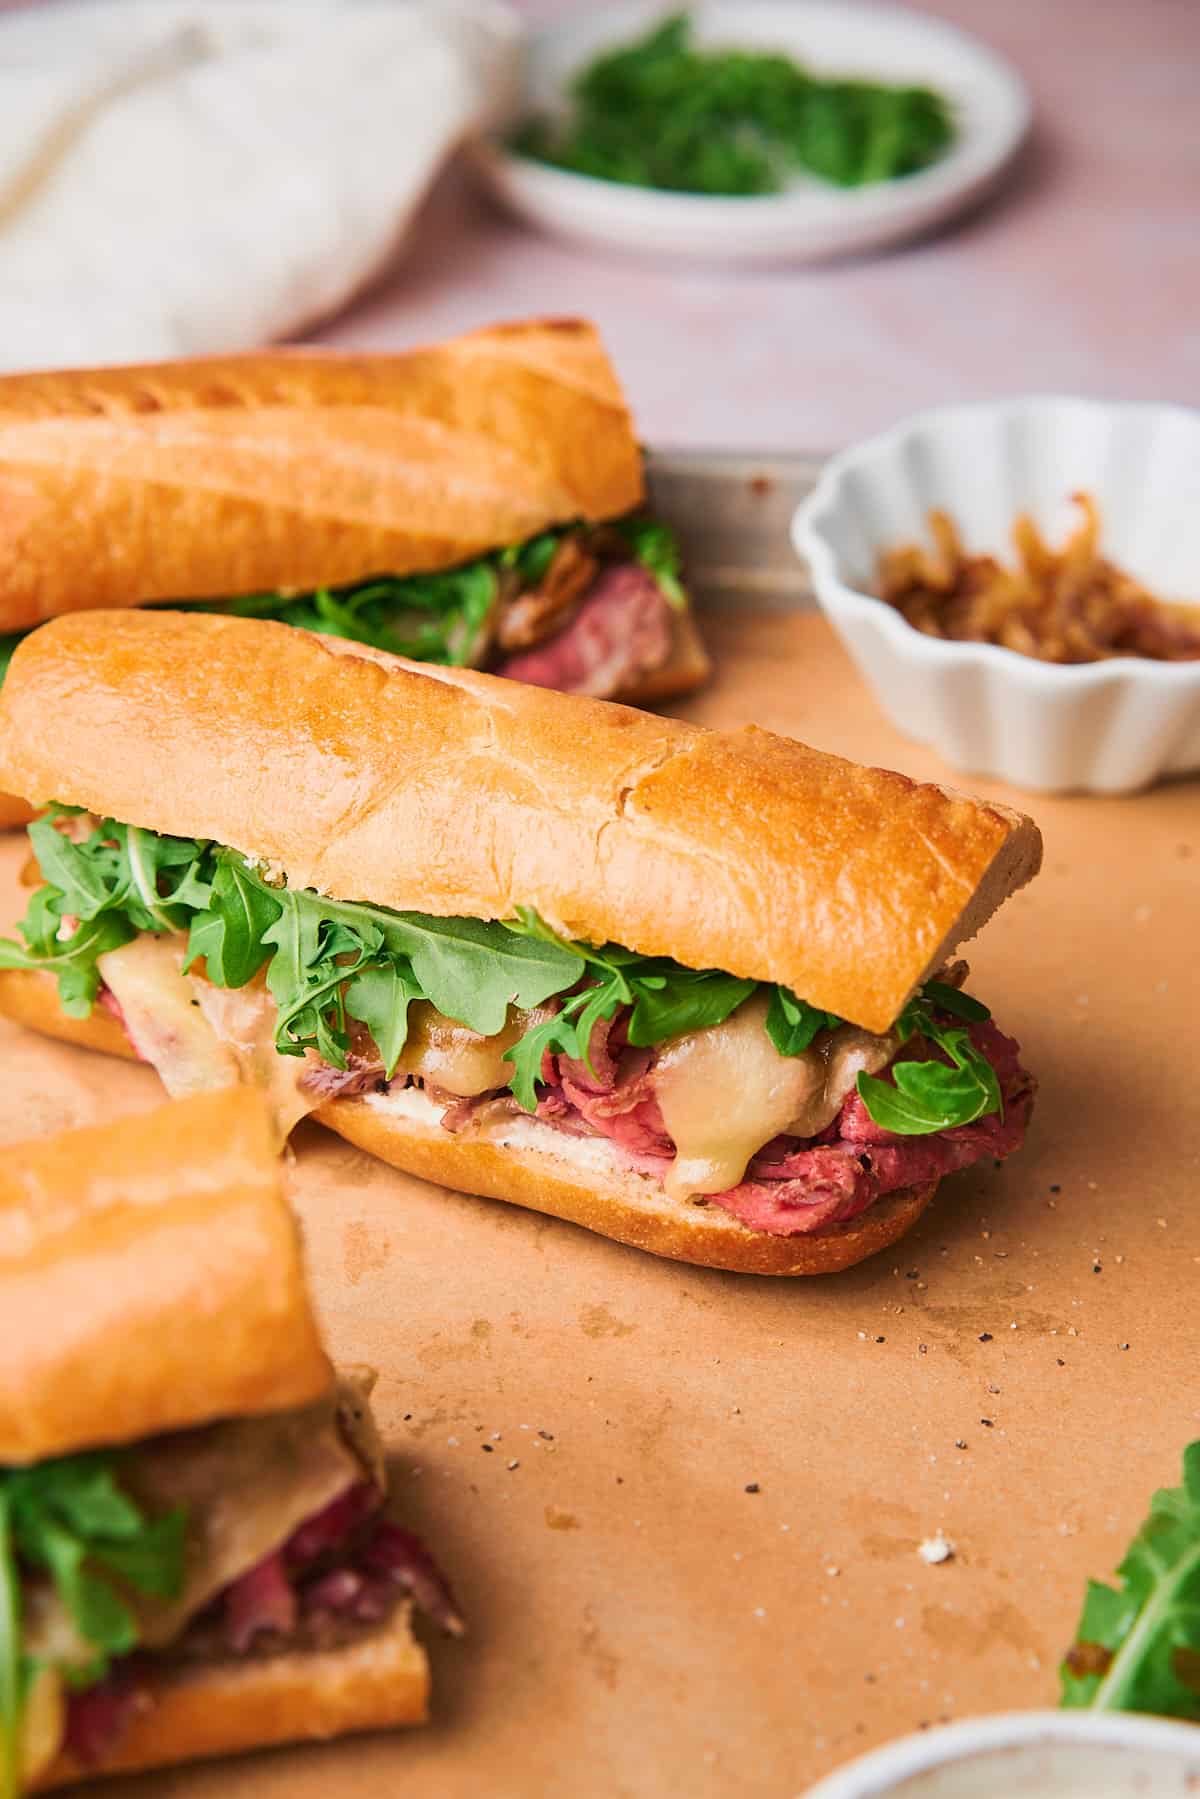 Delicious prime rib sandwich with caramelized onions, arugula, creamy horseradish sauce, and provolone cheese on a baguette.